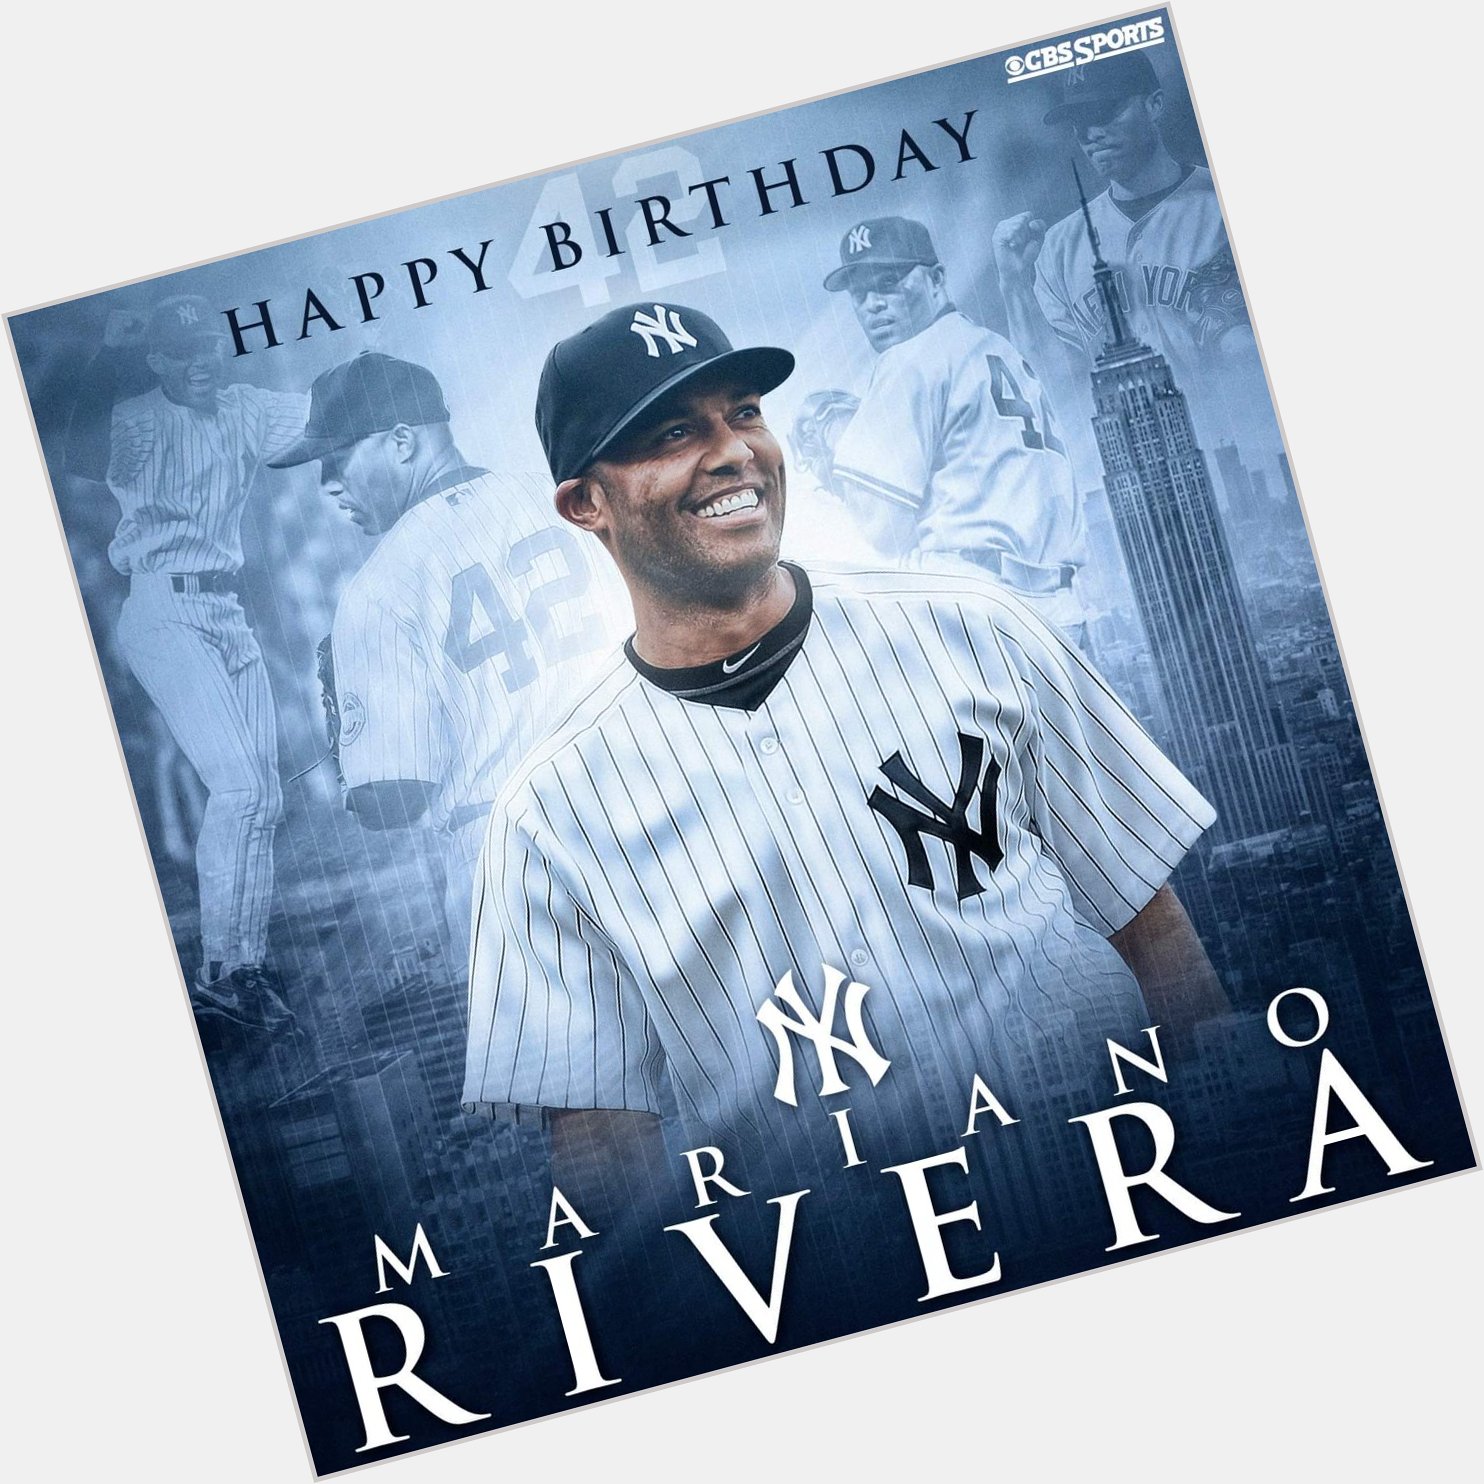 HAPPY BIRTHDAY TO THE GREATEST CLOSER OF ALL TIME & FUTURE MLB HALL OF FAMER MARIANO RIVERA!!! HE\S ONE COOL DUDE 